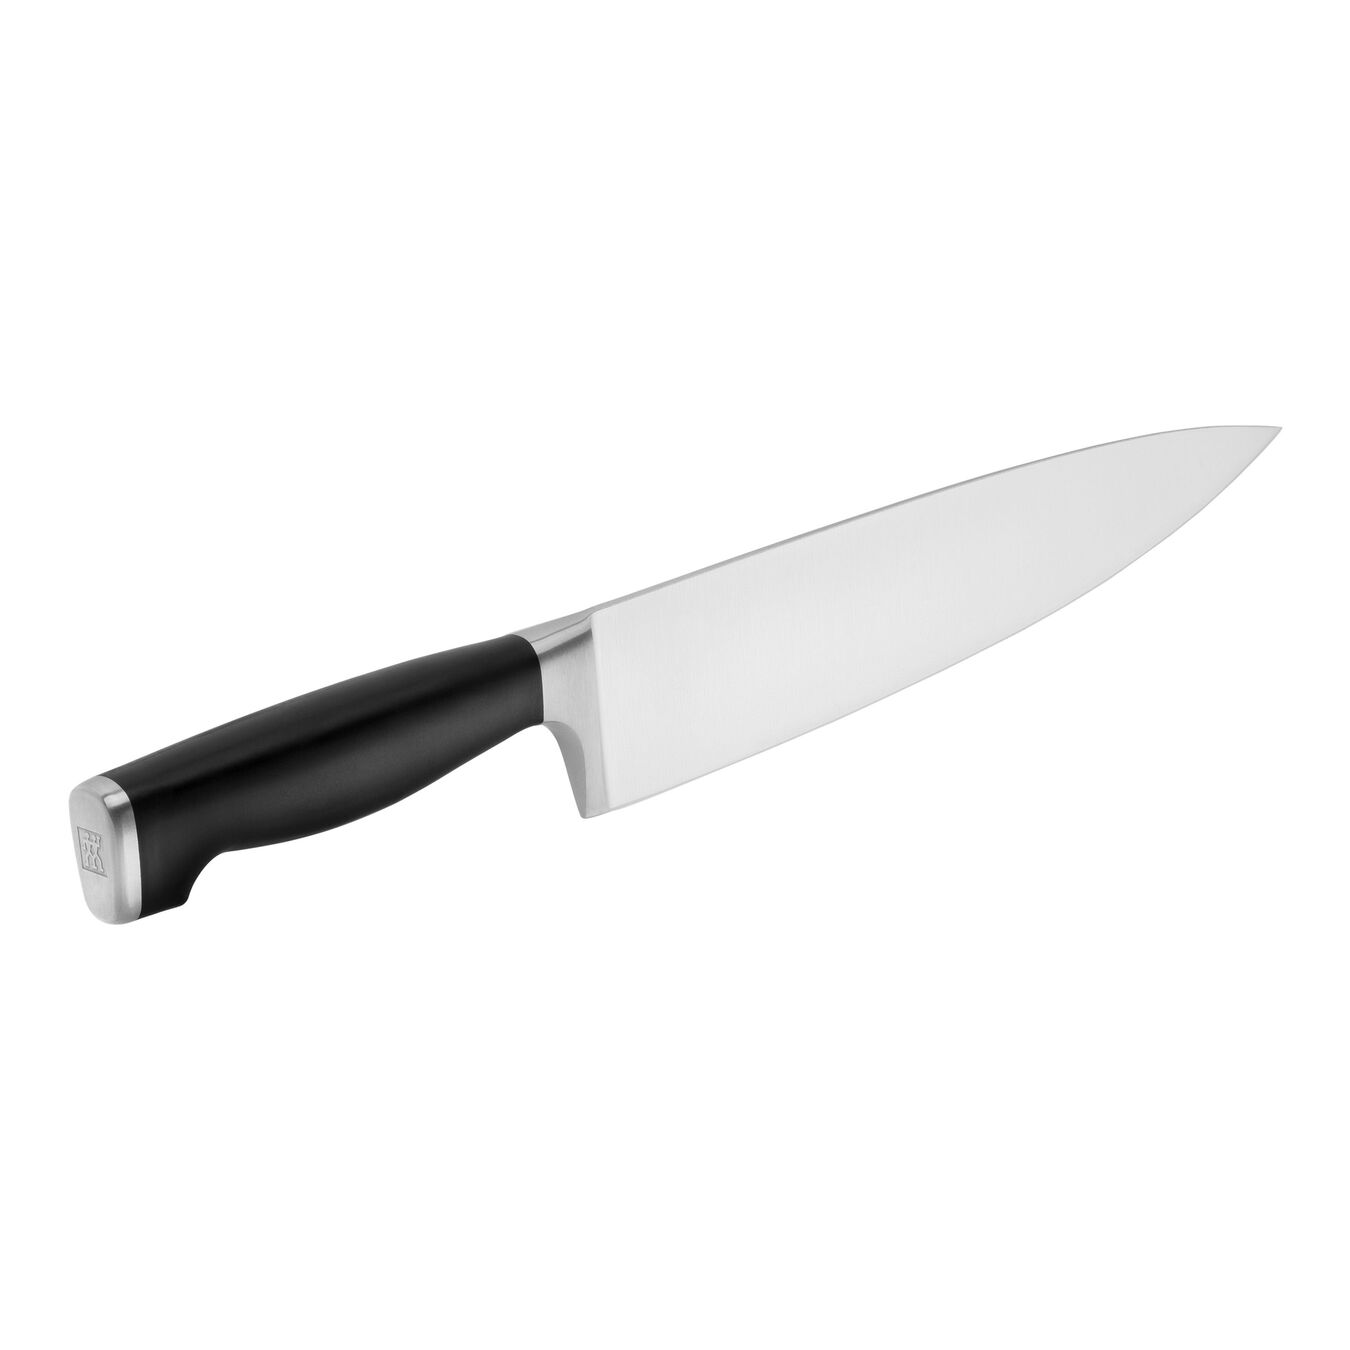 6 inch Chef's knife,,large 2